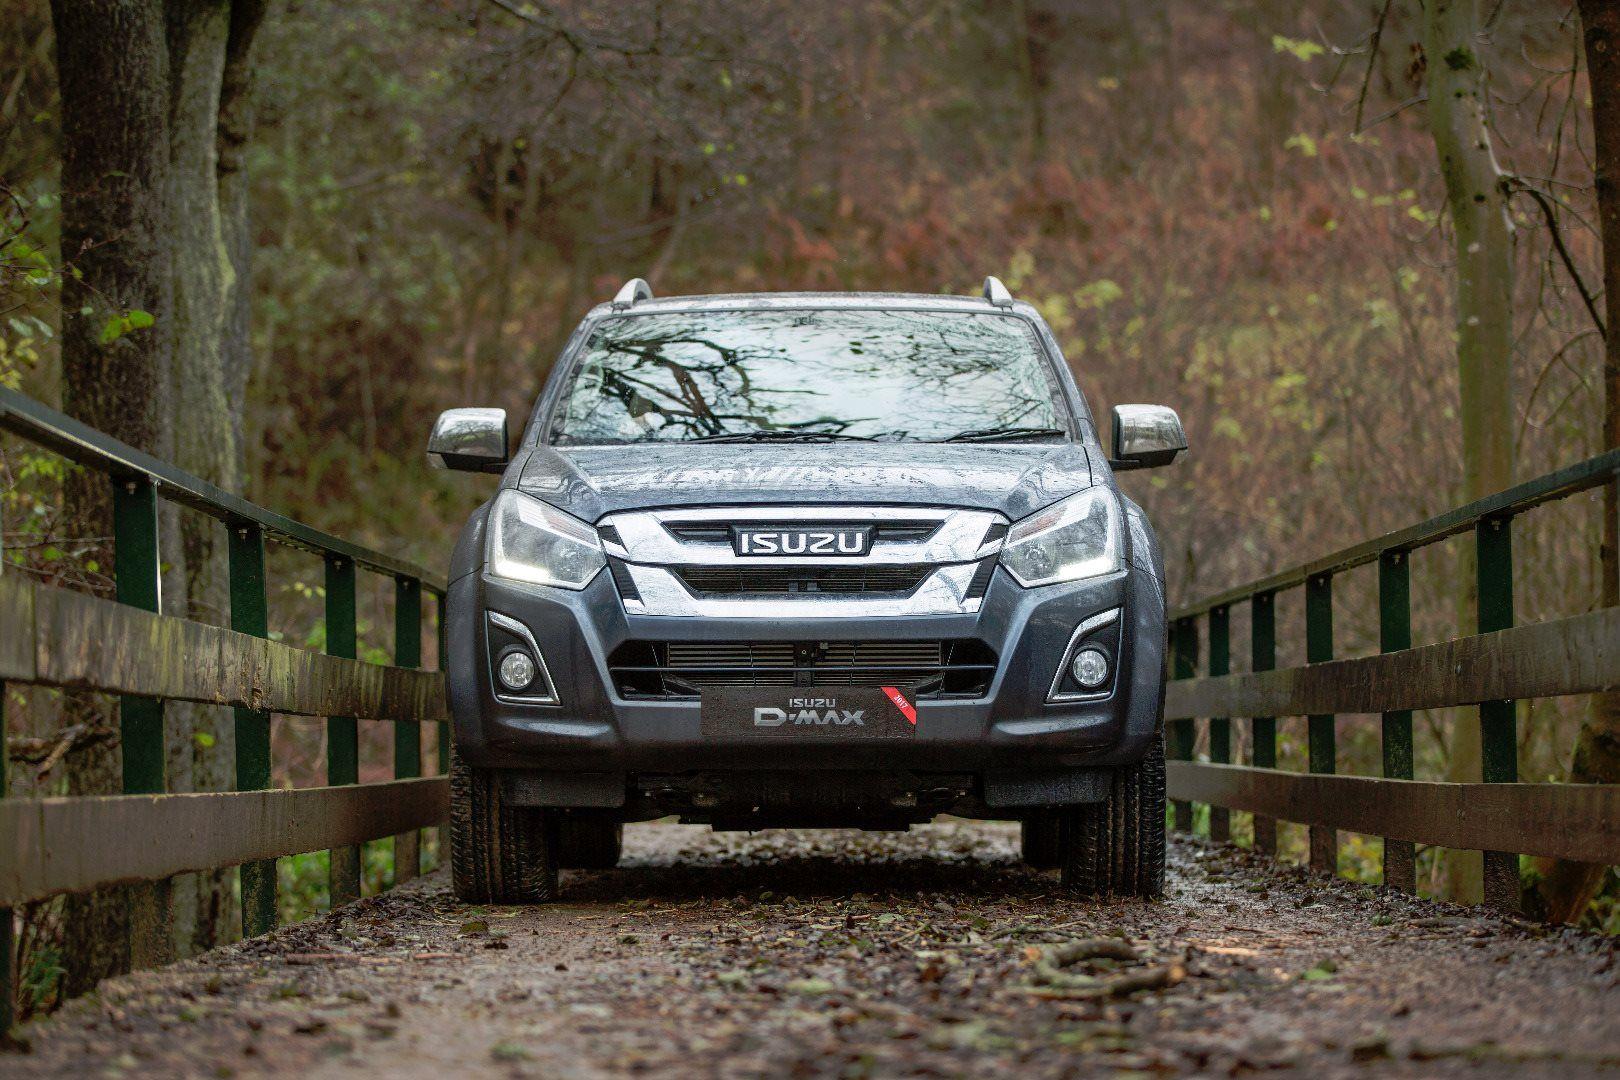 ISUZU UK STRENGTHENS ITS NETWORK WITH FIVE NEW FRANCHISE OPENINGS